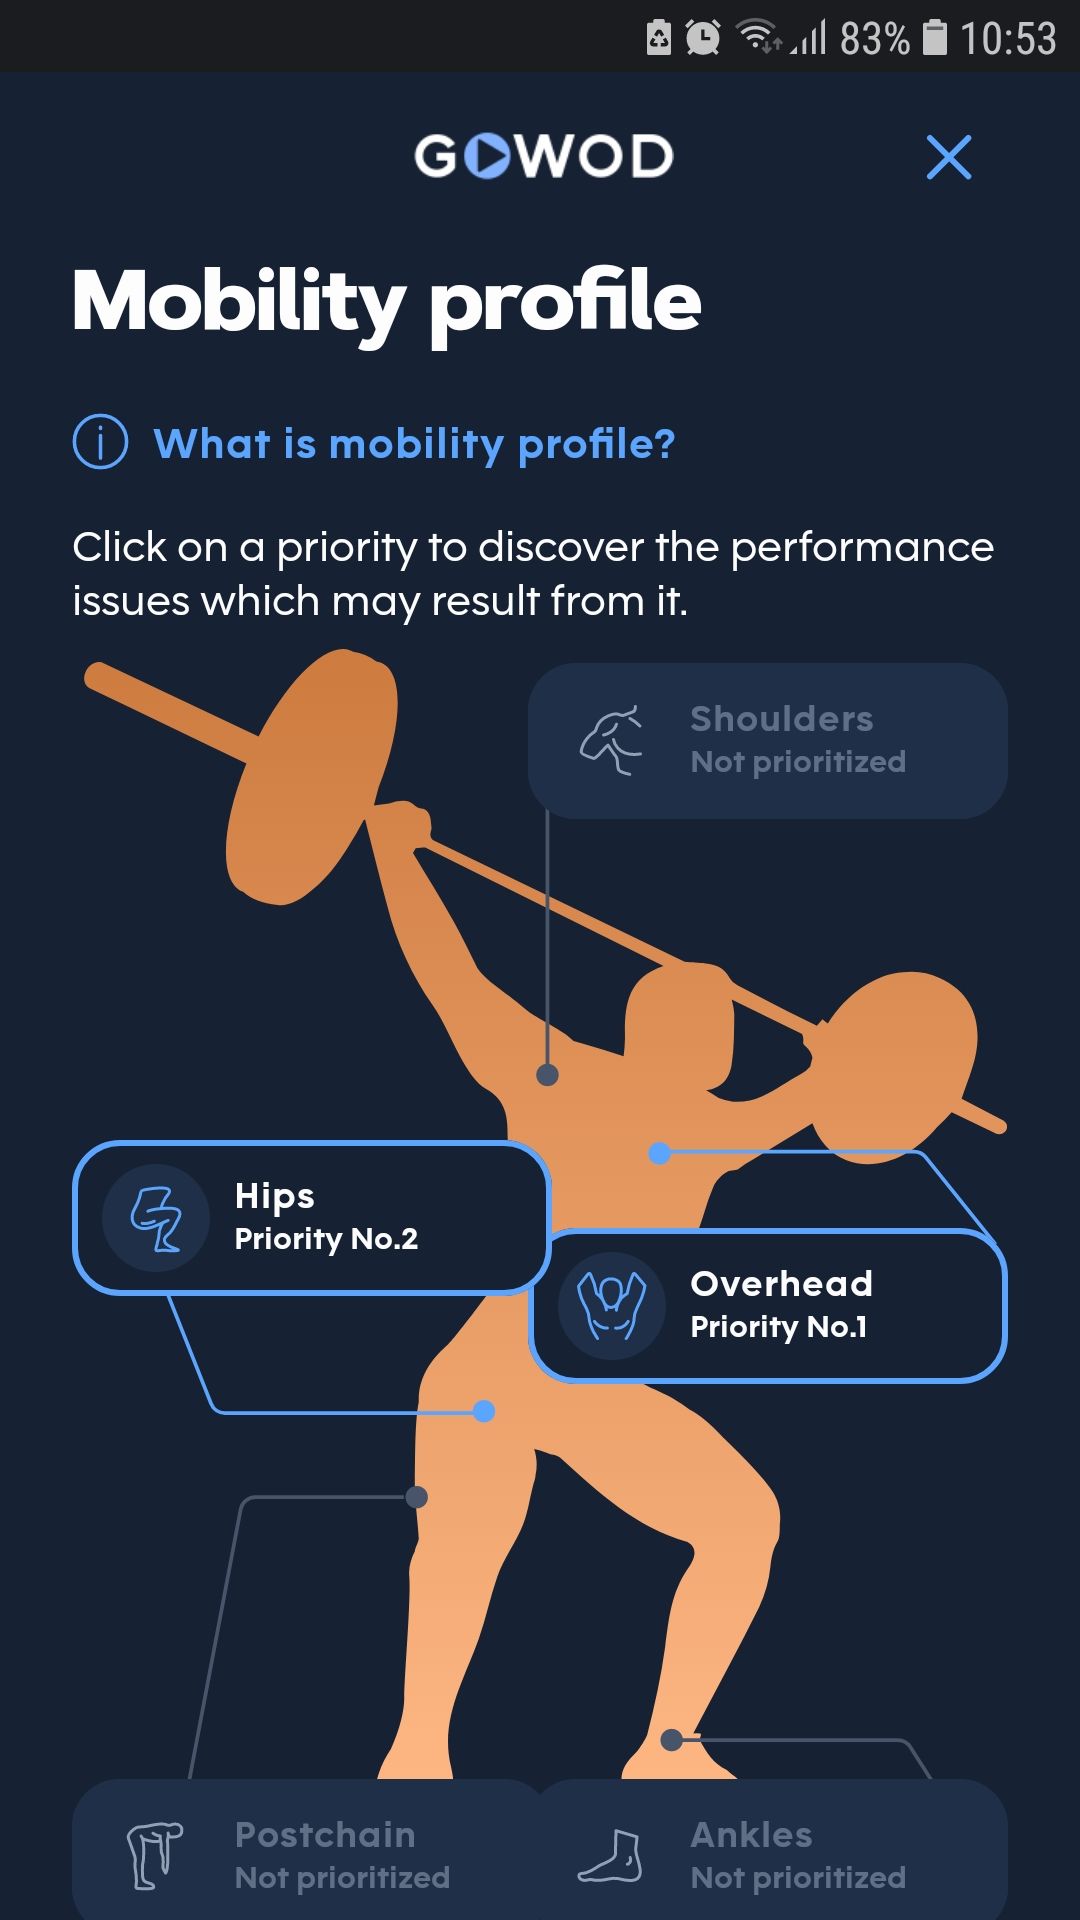 GOWOD mobile app mobility profile